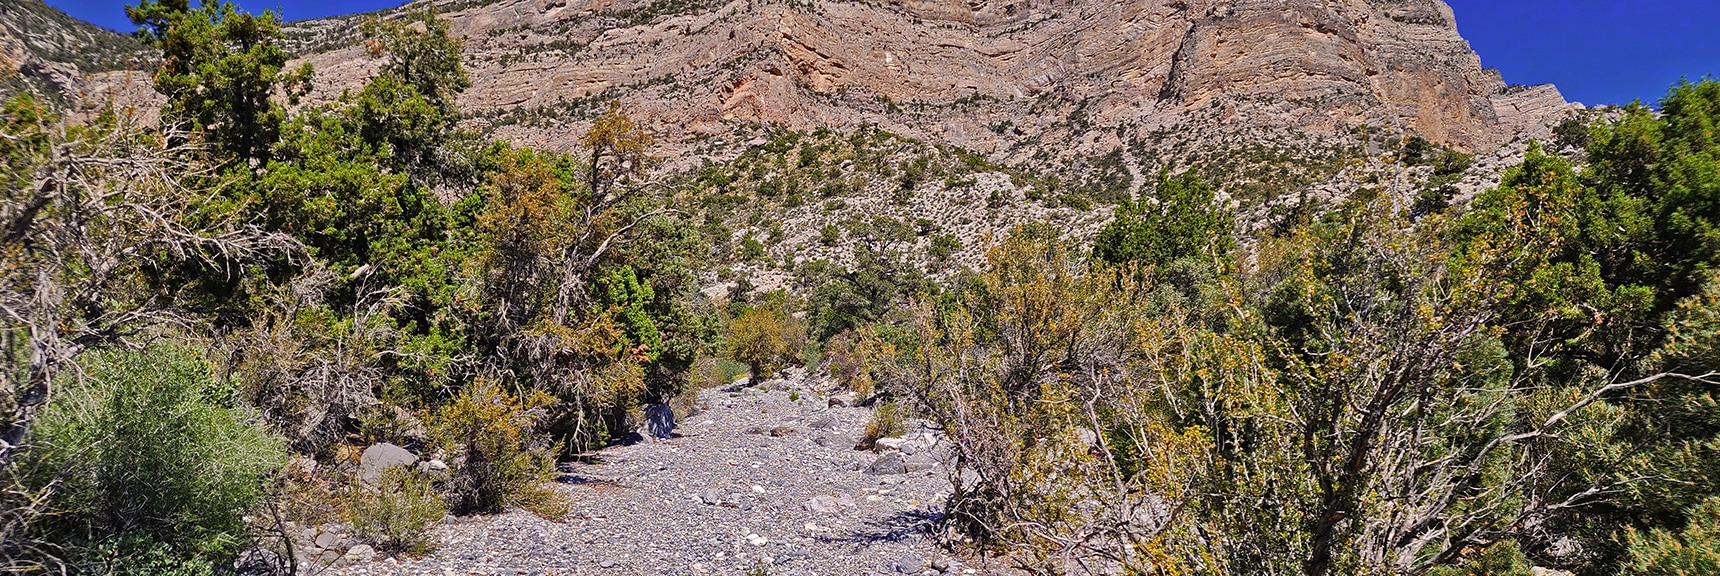 View Back Up this Wide, Open Wash | Kyle Canyon Grand Crossing | Southern Half | Red Rock Canyon National Conservation Area, Nevada